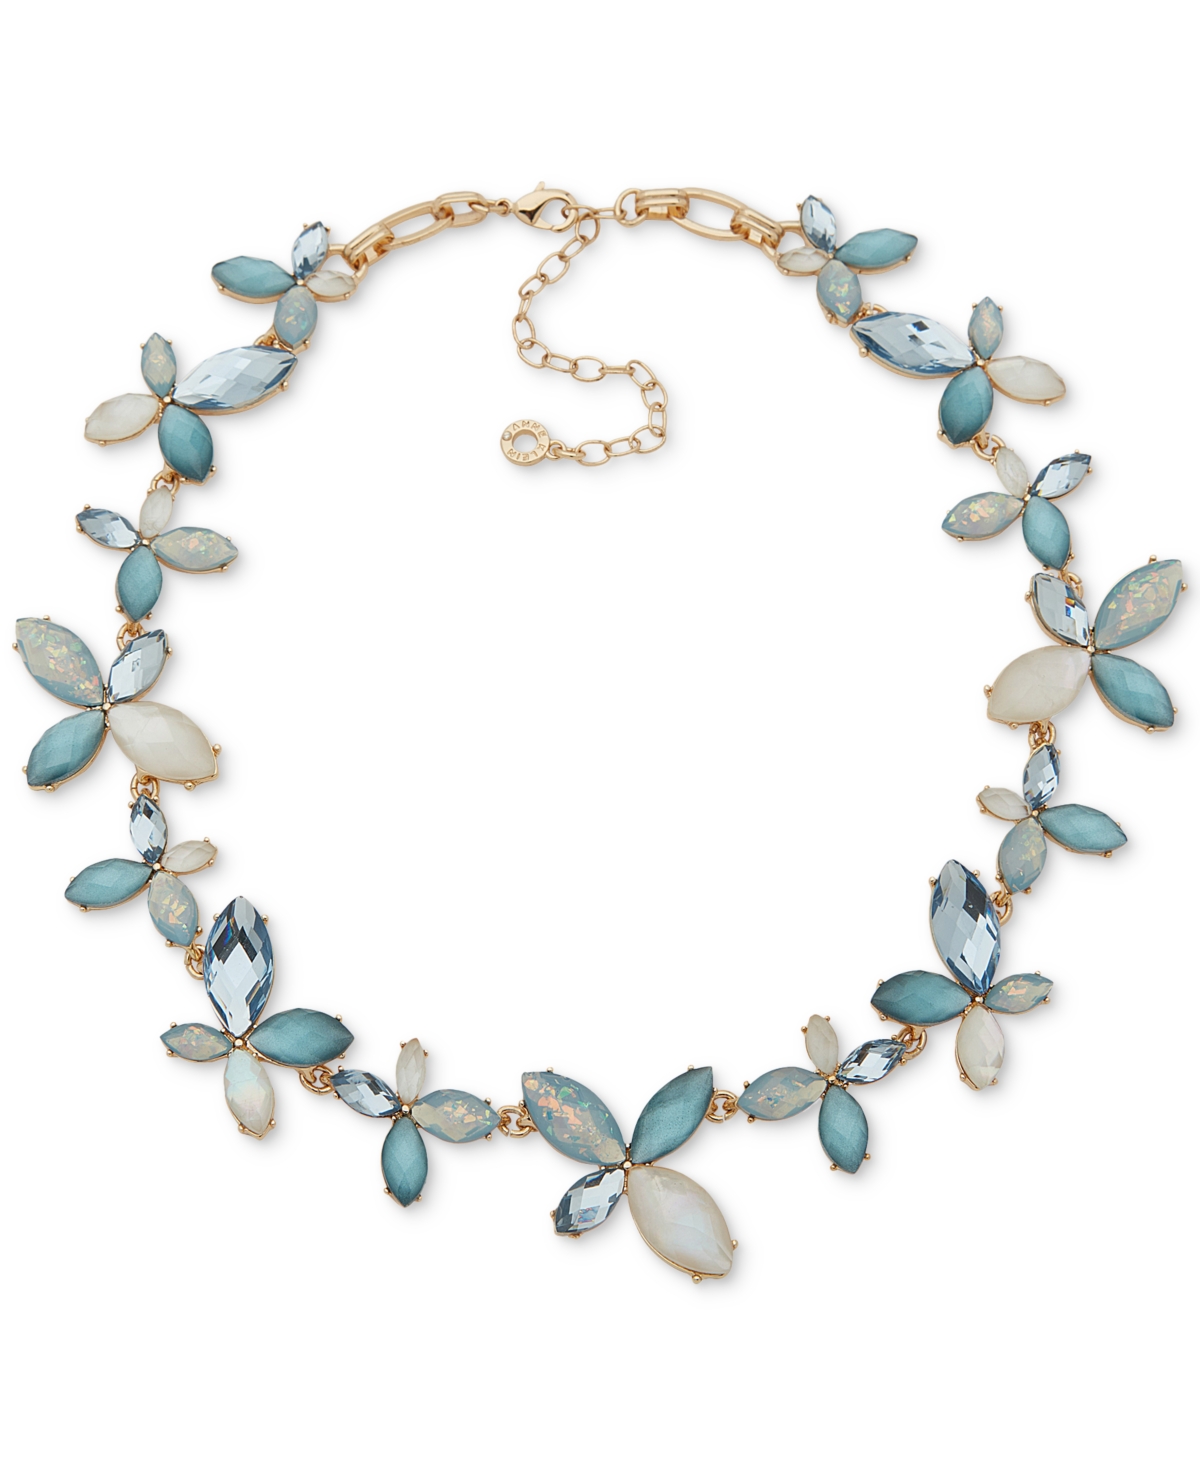 Anne Klein Gold-tone Tonal Stone & Mother-of-pearl Flower All-around Collar Necklace, 16" + 3" Extender In Green